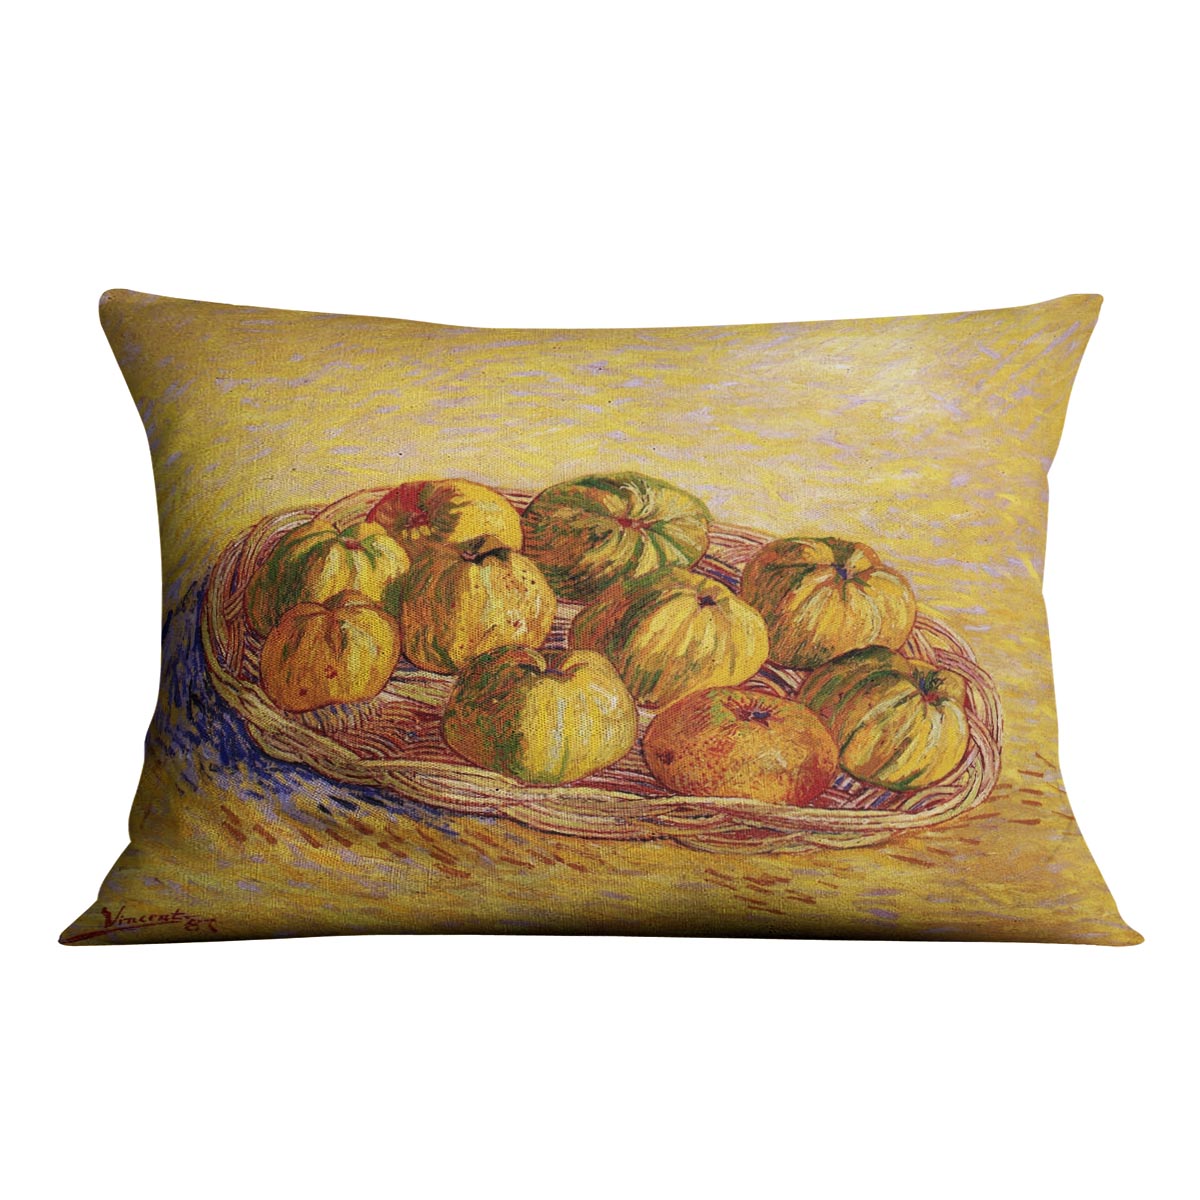 Still Life with Basket of Apples by Van Gogh Cushion